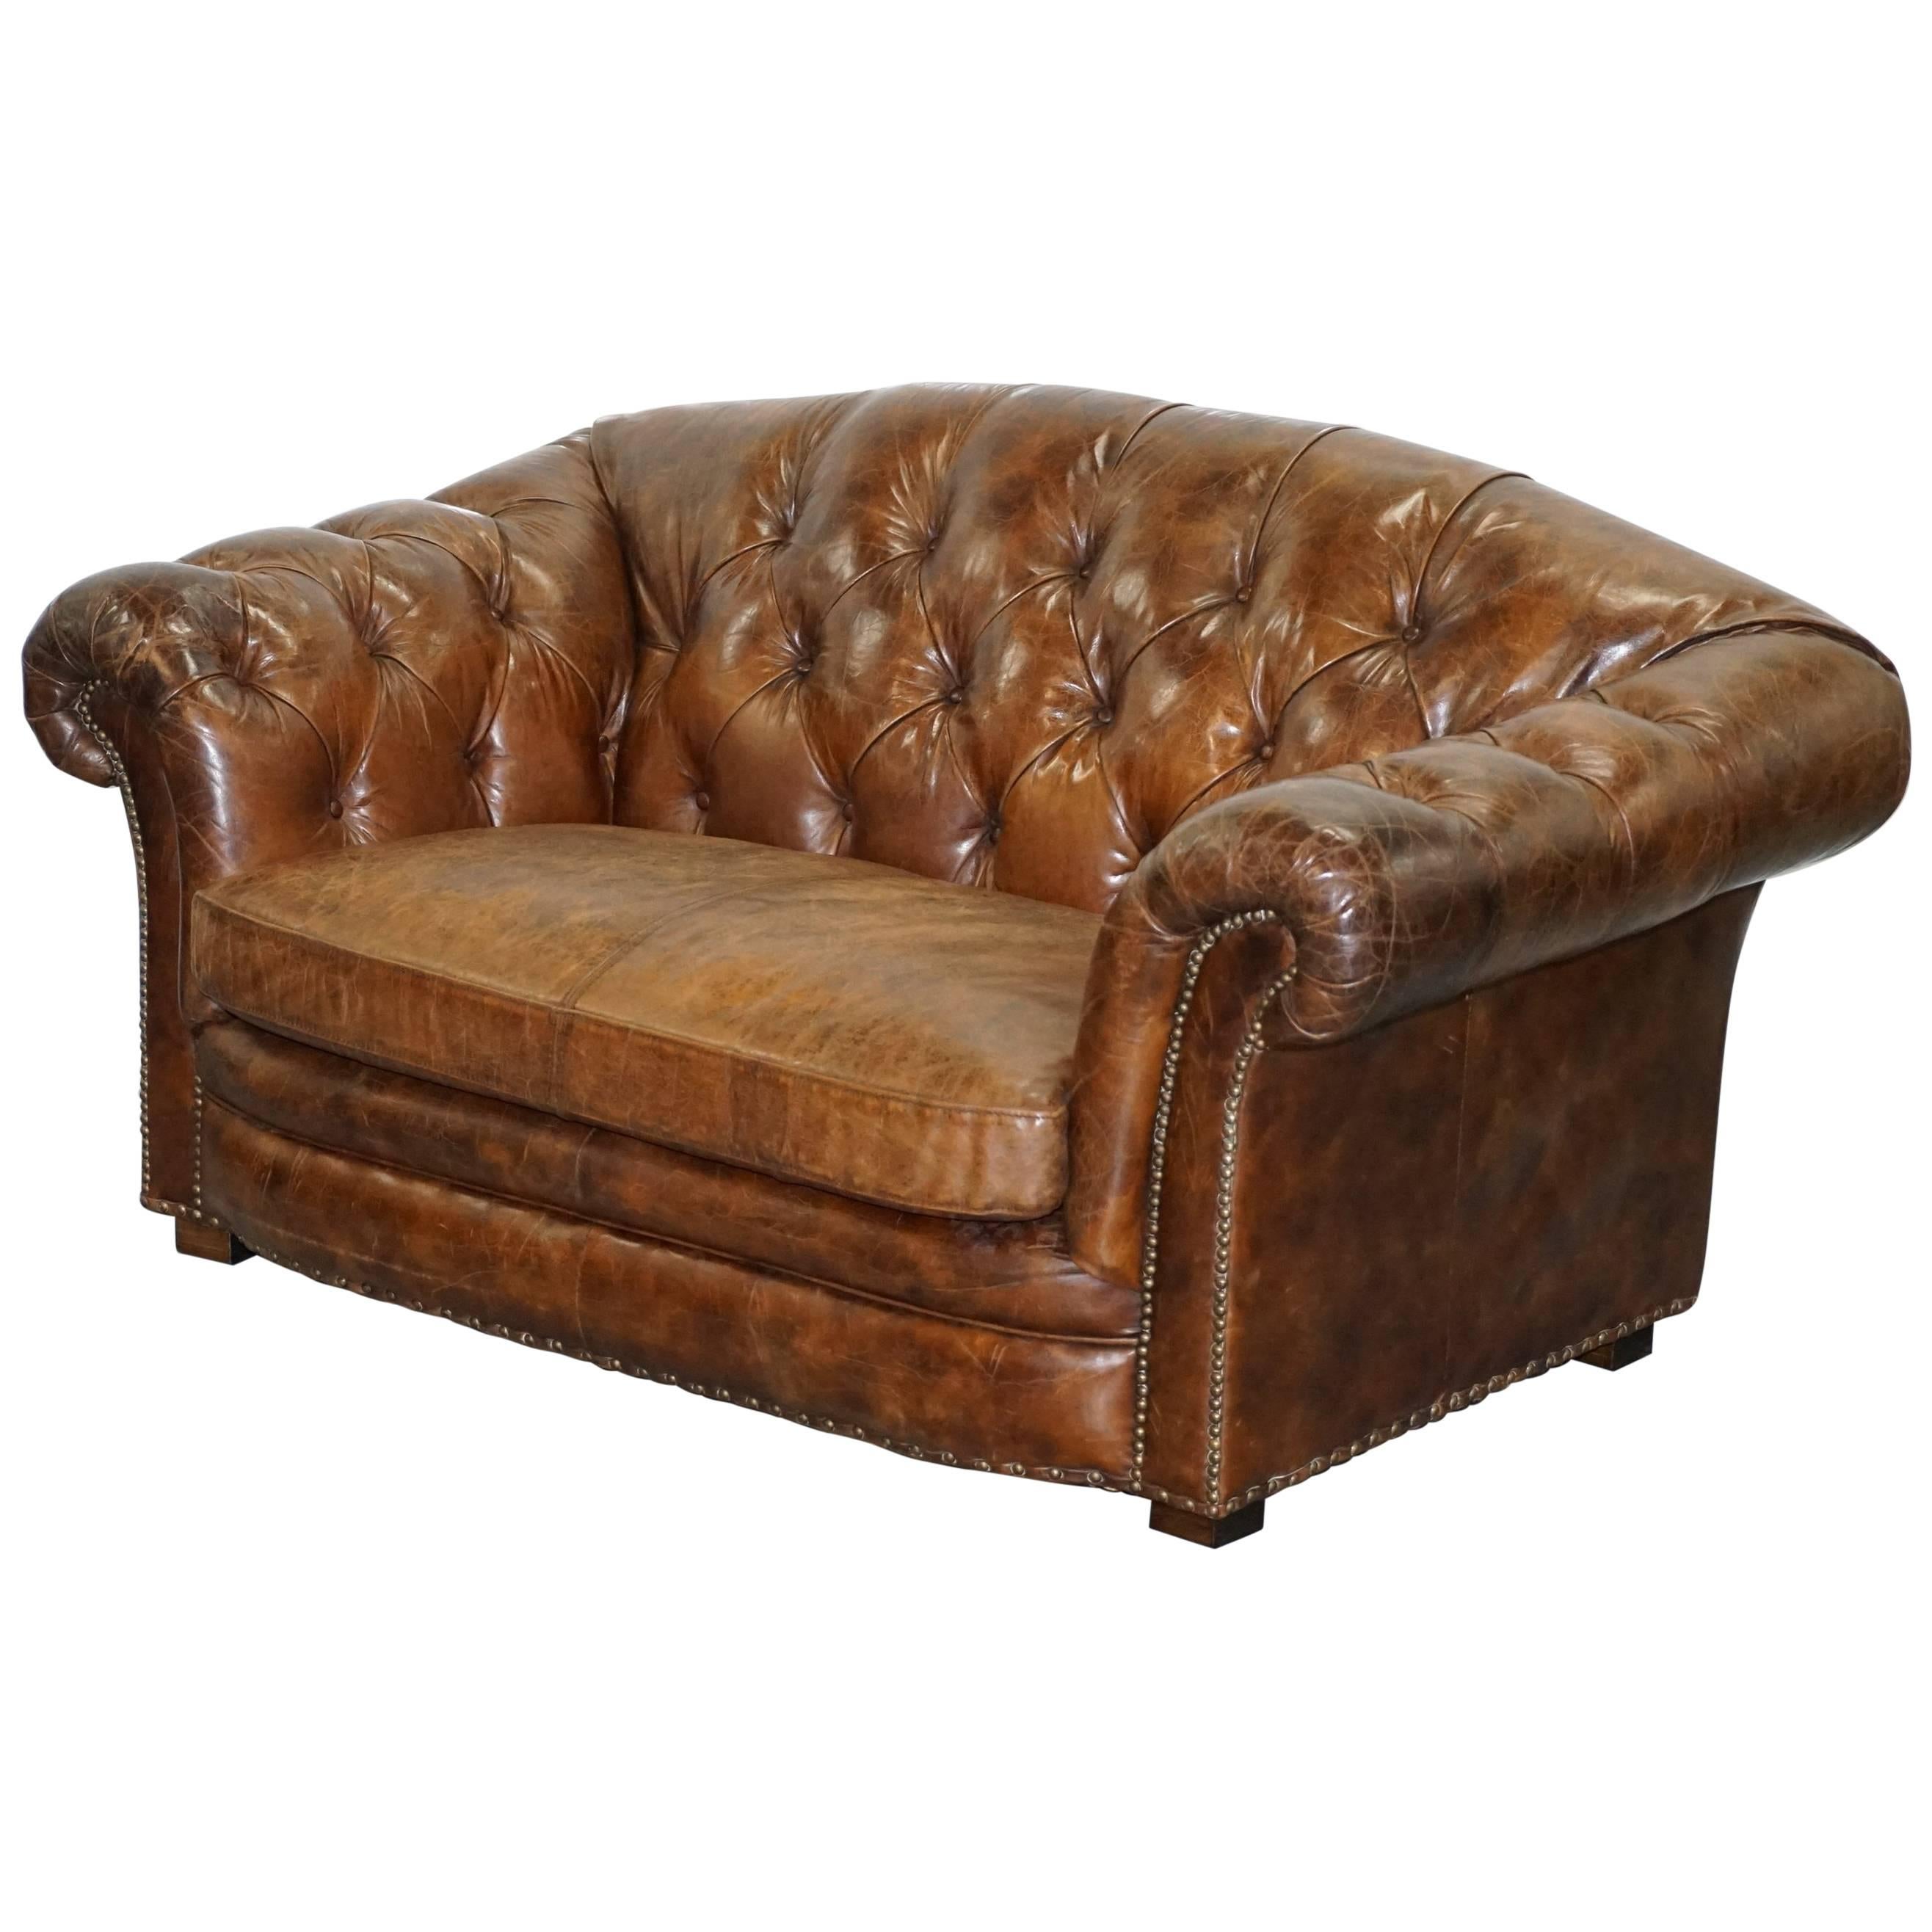 Stunning Aged Brown Heritage Leather Two-Seat Chesterfield Sofa Nice Find